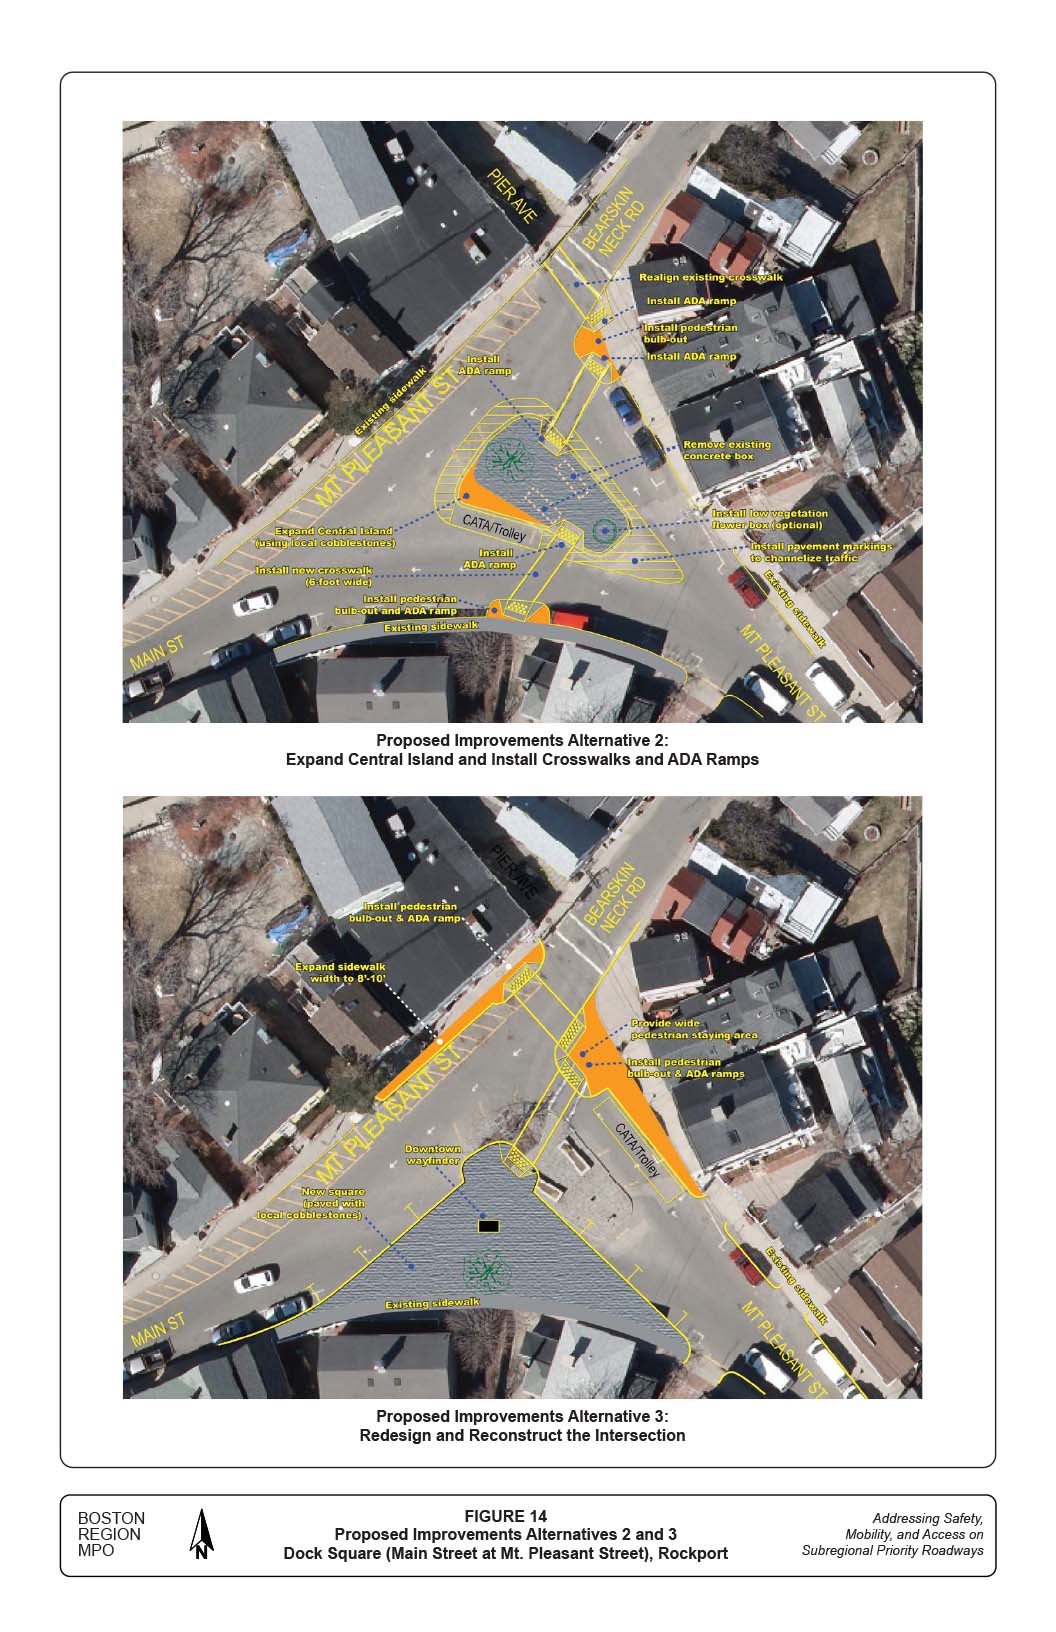 FIGURE 14. Proposed Improvements Alternatives 2 and 3 Dock Square (Main Street at Mt. Pleasant Street), Rockport
This figure contains two aerial-view maps of the intersection of Dock Square (Main Street at Mt. Pleasant Street), Rockport in the study area. The maps denote, with both text and pointing arrows, the existing conditions and proposed improvements. 
1)	The first image, Expand Central Island and Install Crosswalks and ADA Ramps, cites (in clock-wise direction): Realign existing crosswalk; install ADA ramp; install pedestrian bulb-out; install ADA ramp; remove existing concrete box; install low vegetation flower box (optional); install pavement markings to channelize traffic; existing sidewalk; install ADA ramp; existing sidewalk; install pedestrian bulb-out and ADA ramp; install new crosswalk (6-foot wide); expand central island (using local cobblestones; existing sidewalk; and install ADA ramp. 
2)	The second image, Proposed Improvements Alternative 3: Redesign and Reconstruct the Intersection, cites (in clock-wise direction): Provide wide pedestrian staying area; install pedestrian bulb-out and ADA ramps; existing sidewalk; existing sidewalk; downtown wayfinder; new square (paved with local cobblestones); expand sidewalk width to 8’-10’; and install pedestrian bulb-out and ADA ramp.
